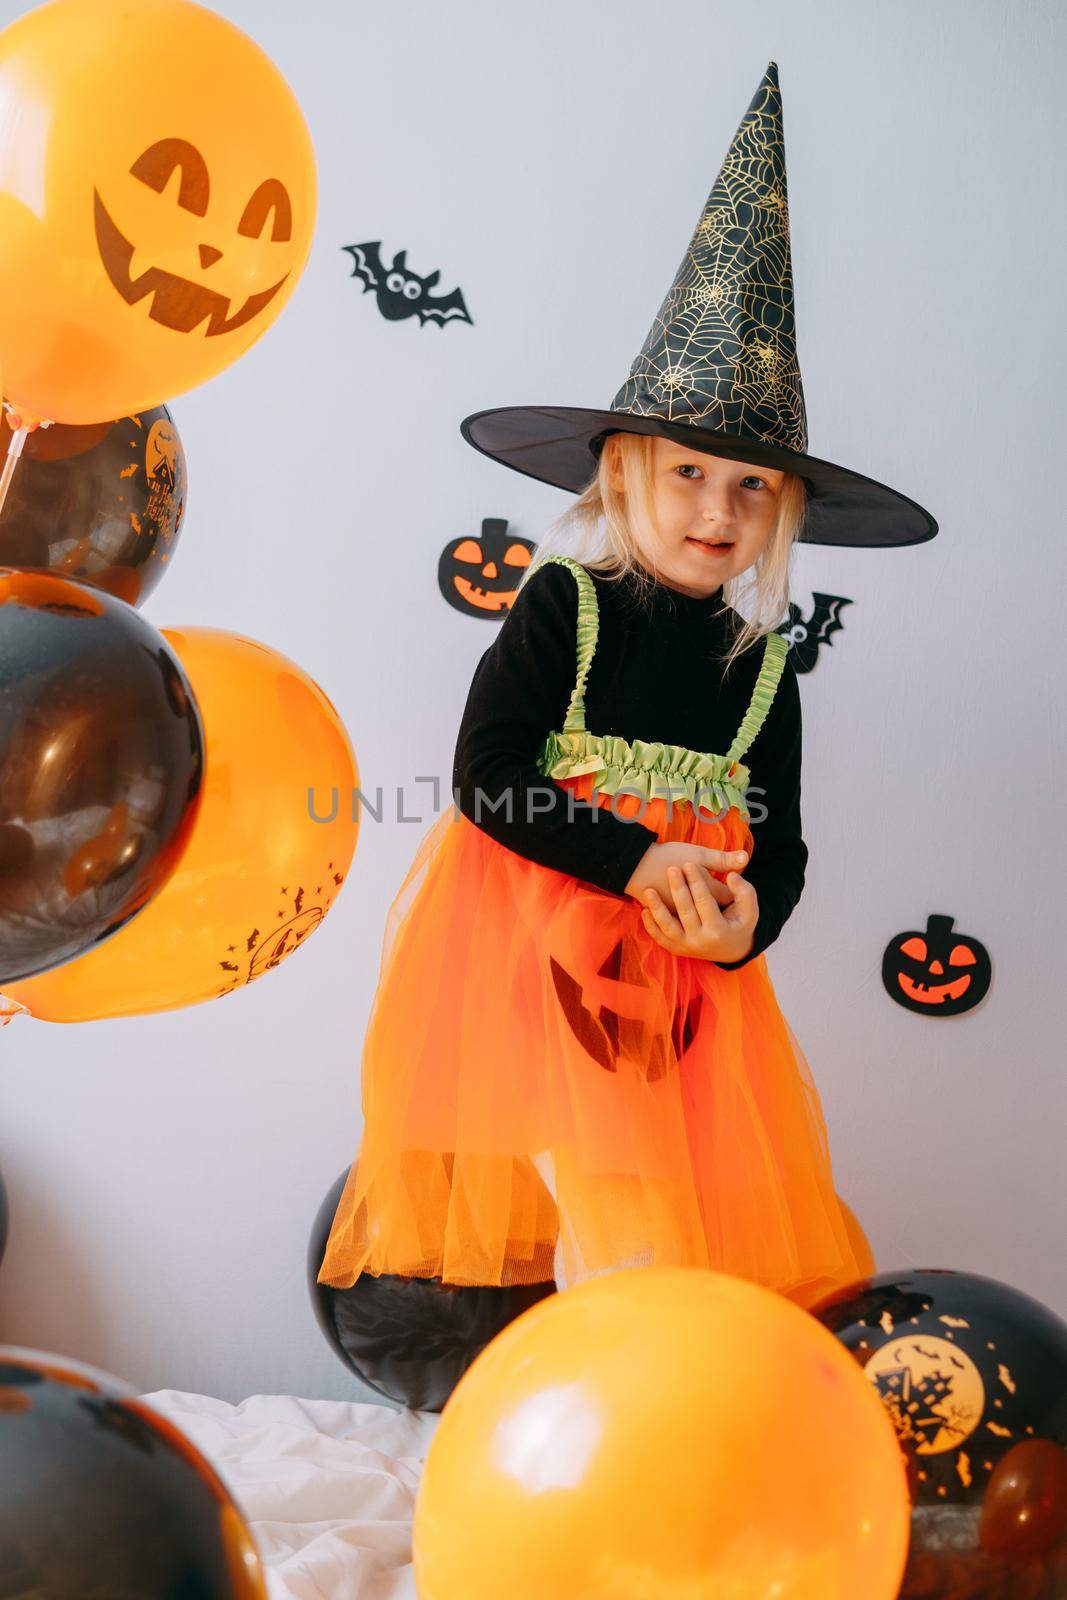 Children's Halloween - a girl in a witch hat and a carnival costume with airy orange and black balloons at home. Ready to celebrate Halloween by Annu1tochka